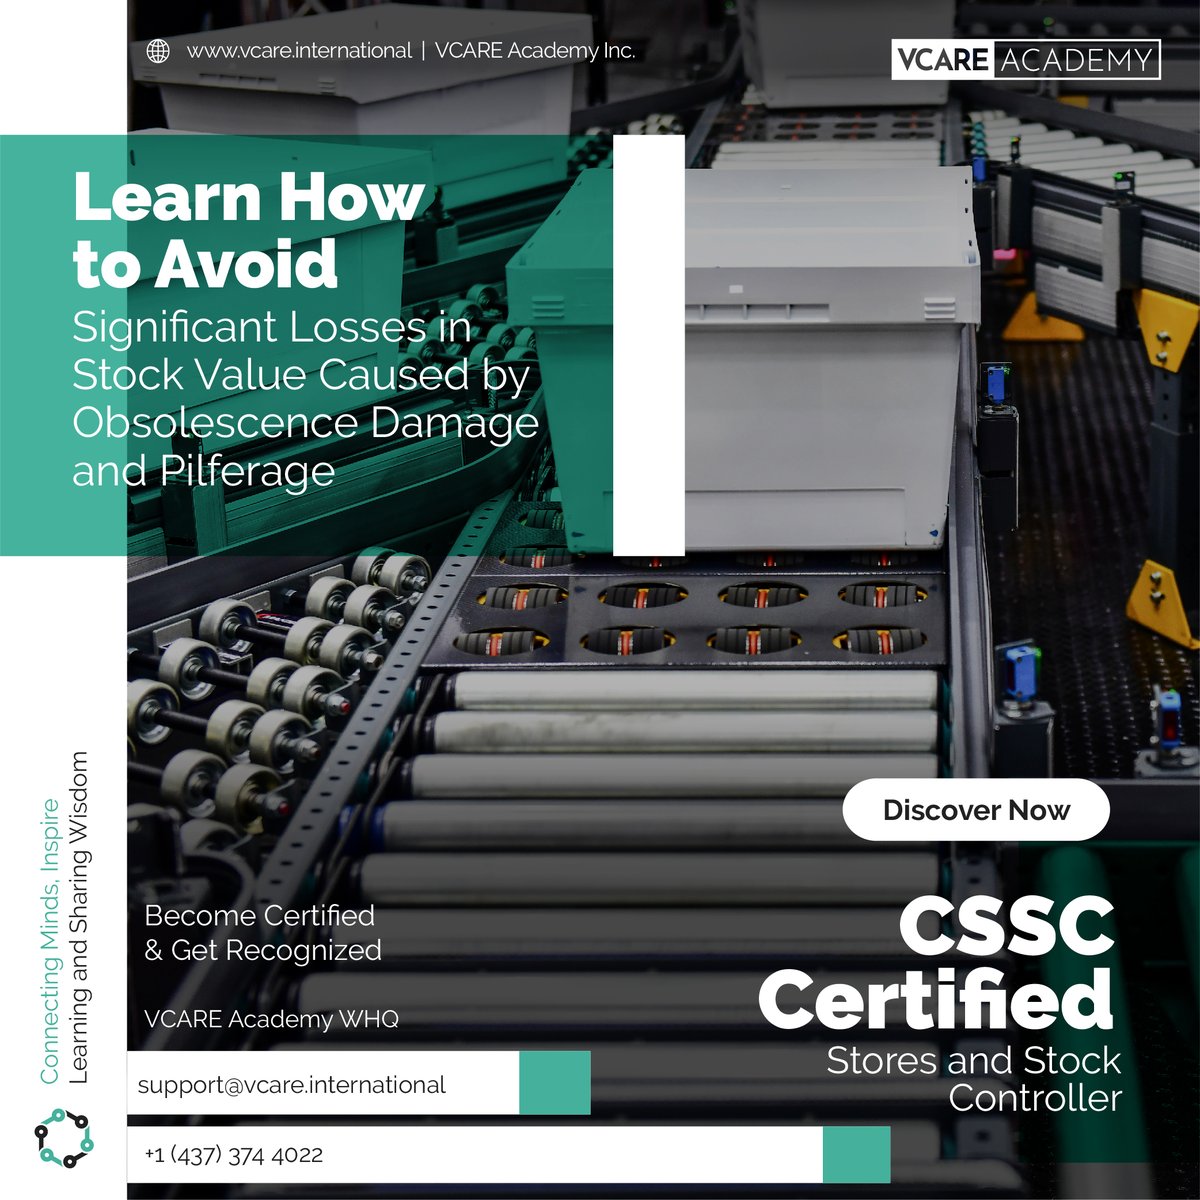 🎯 Learn how to avoid significant losses in stock value caused by obsolescence damage and pilferage.

Discover ⮞ CSSC Certification
🌐 vcare.international/certification/…